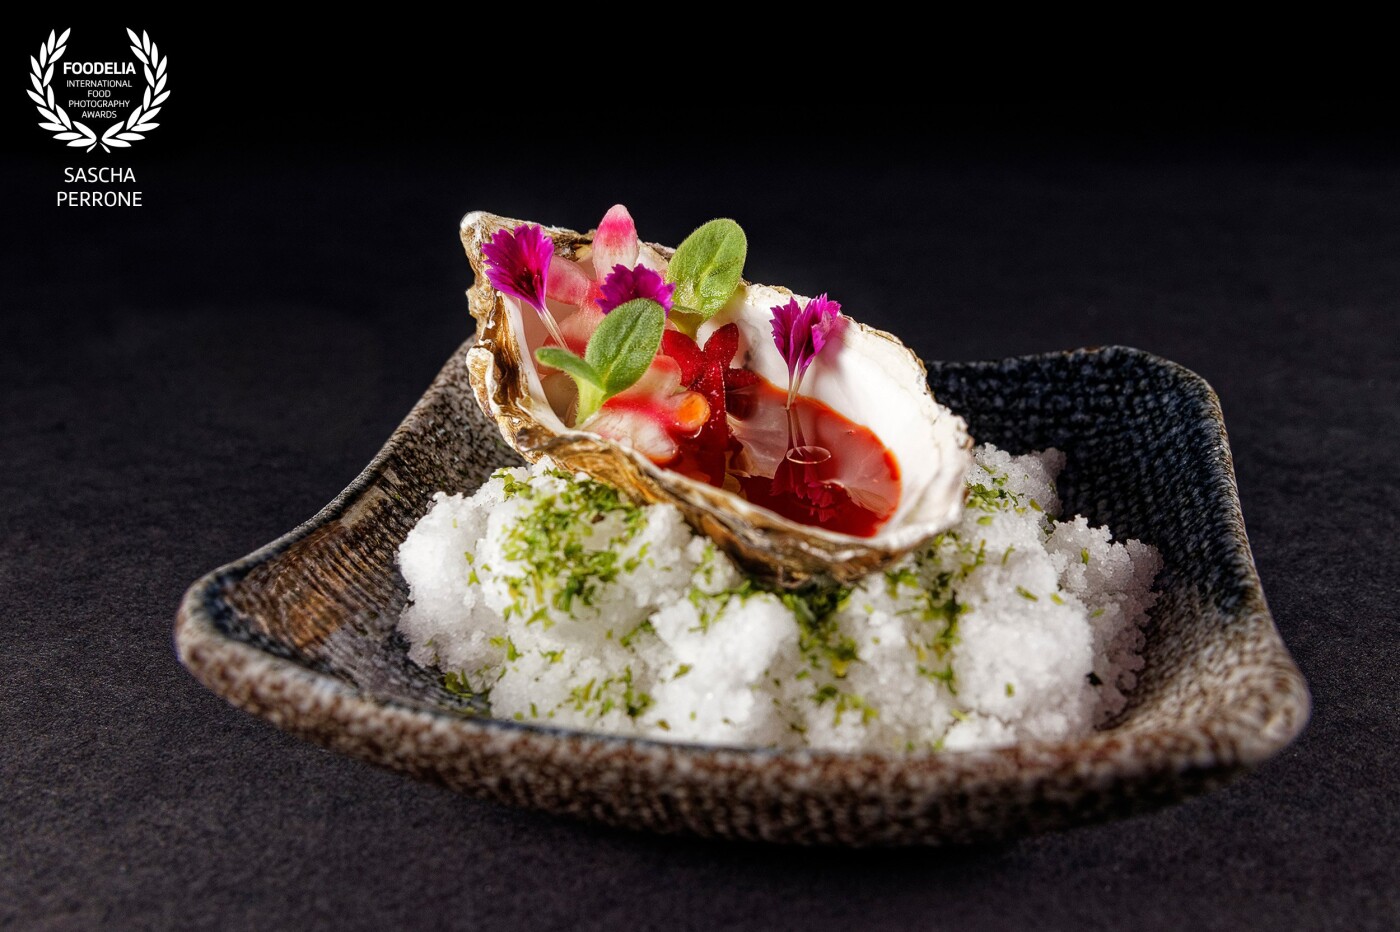 A dish by chef Lukas Jokobi in the modern European-Asian fusion Restaurant "zweigleisig" in Düsseldorf: oyster with fermented beetroot and gin.